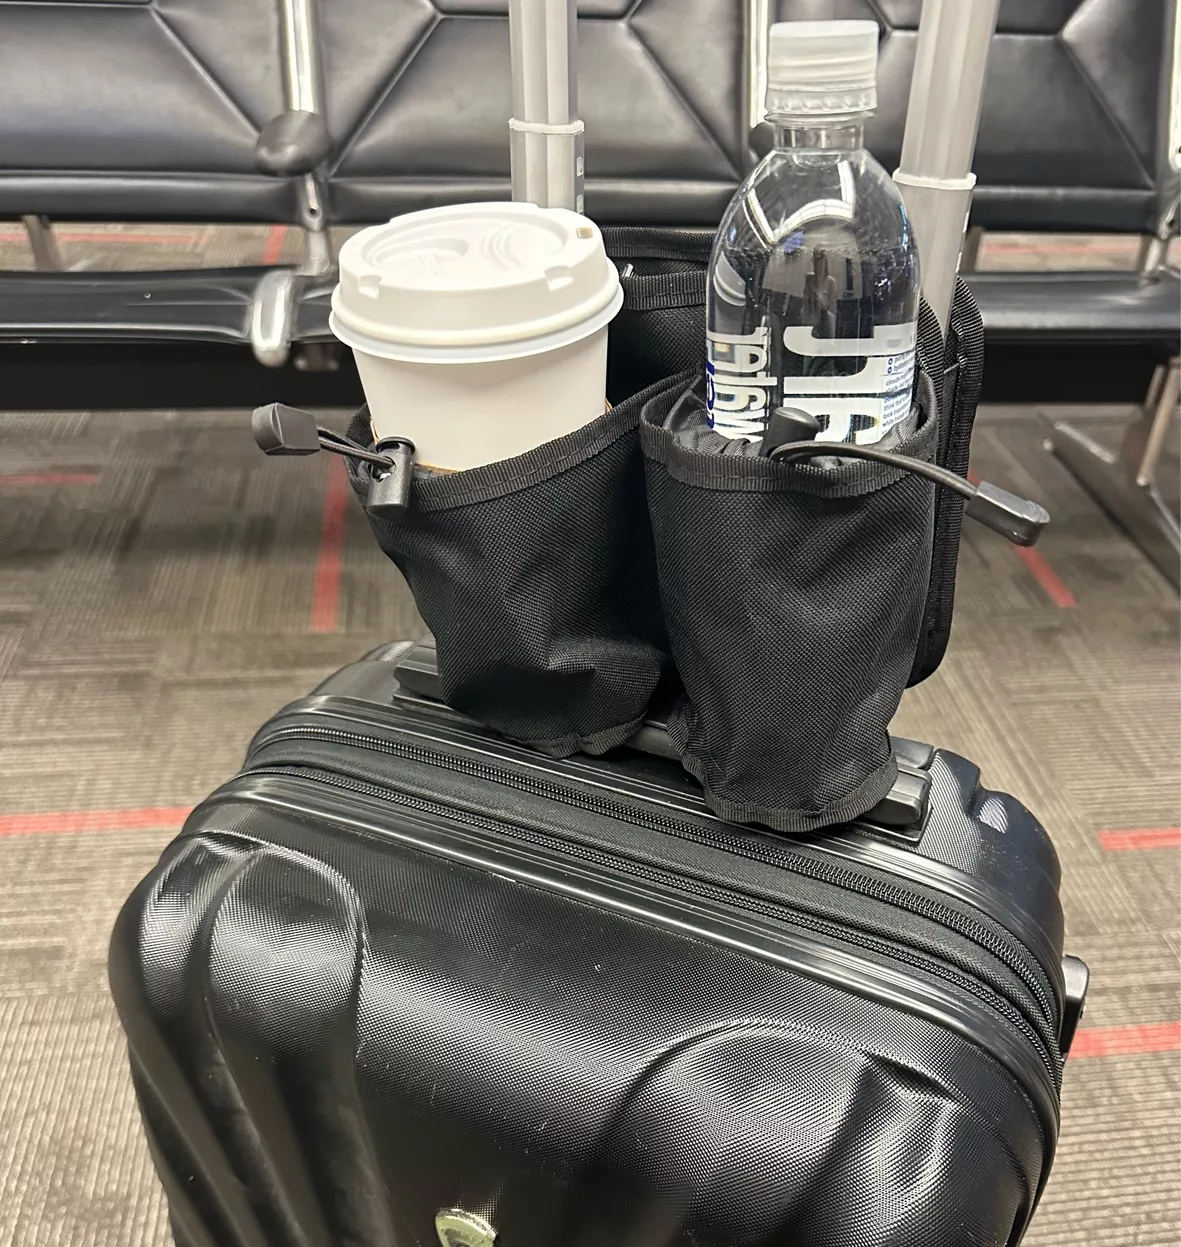 Give It My Some Travel Mug - The Silver Suitcase